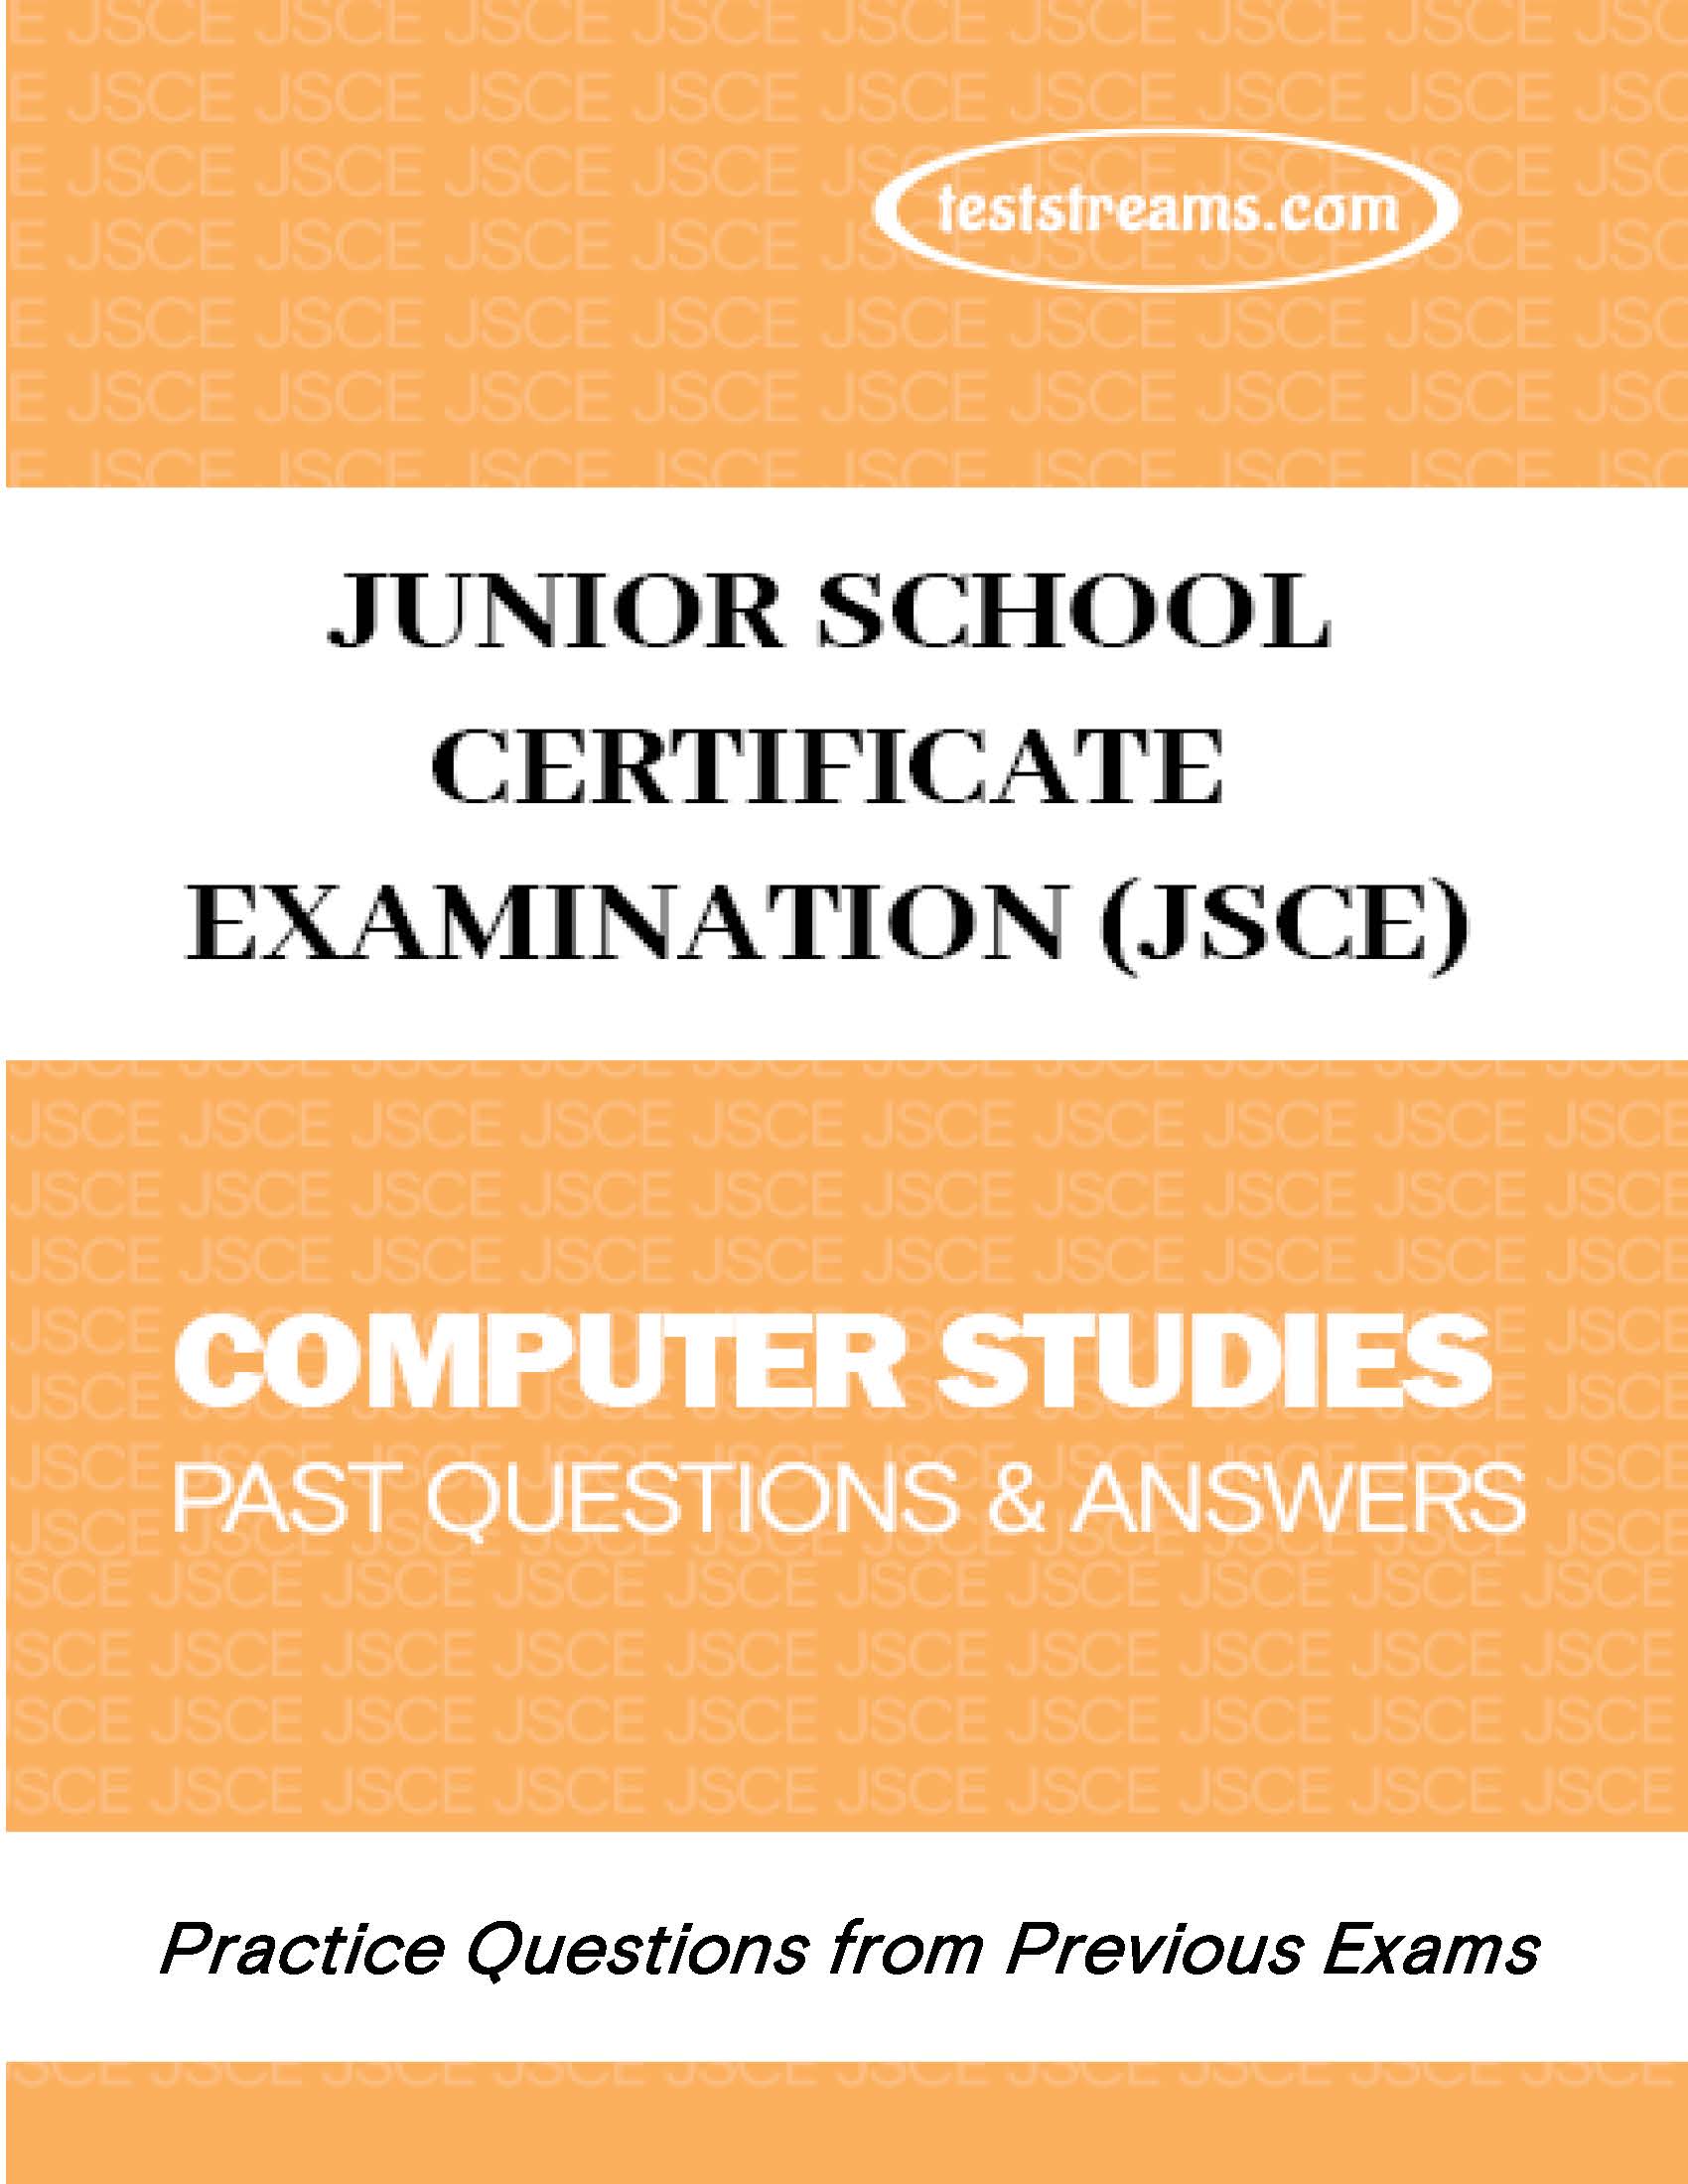 JSCE Computer Science Practice Questions and Answers MS-WORD/PDF Download